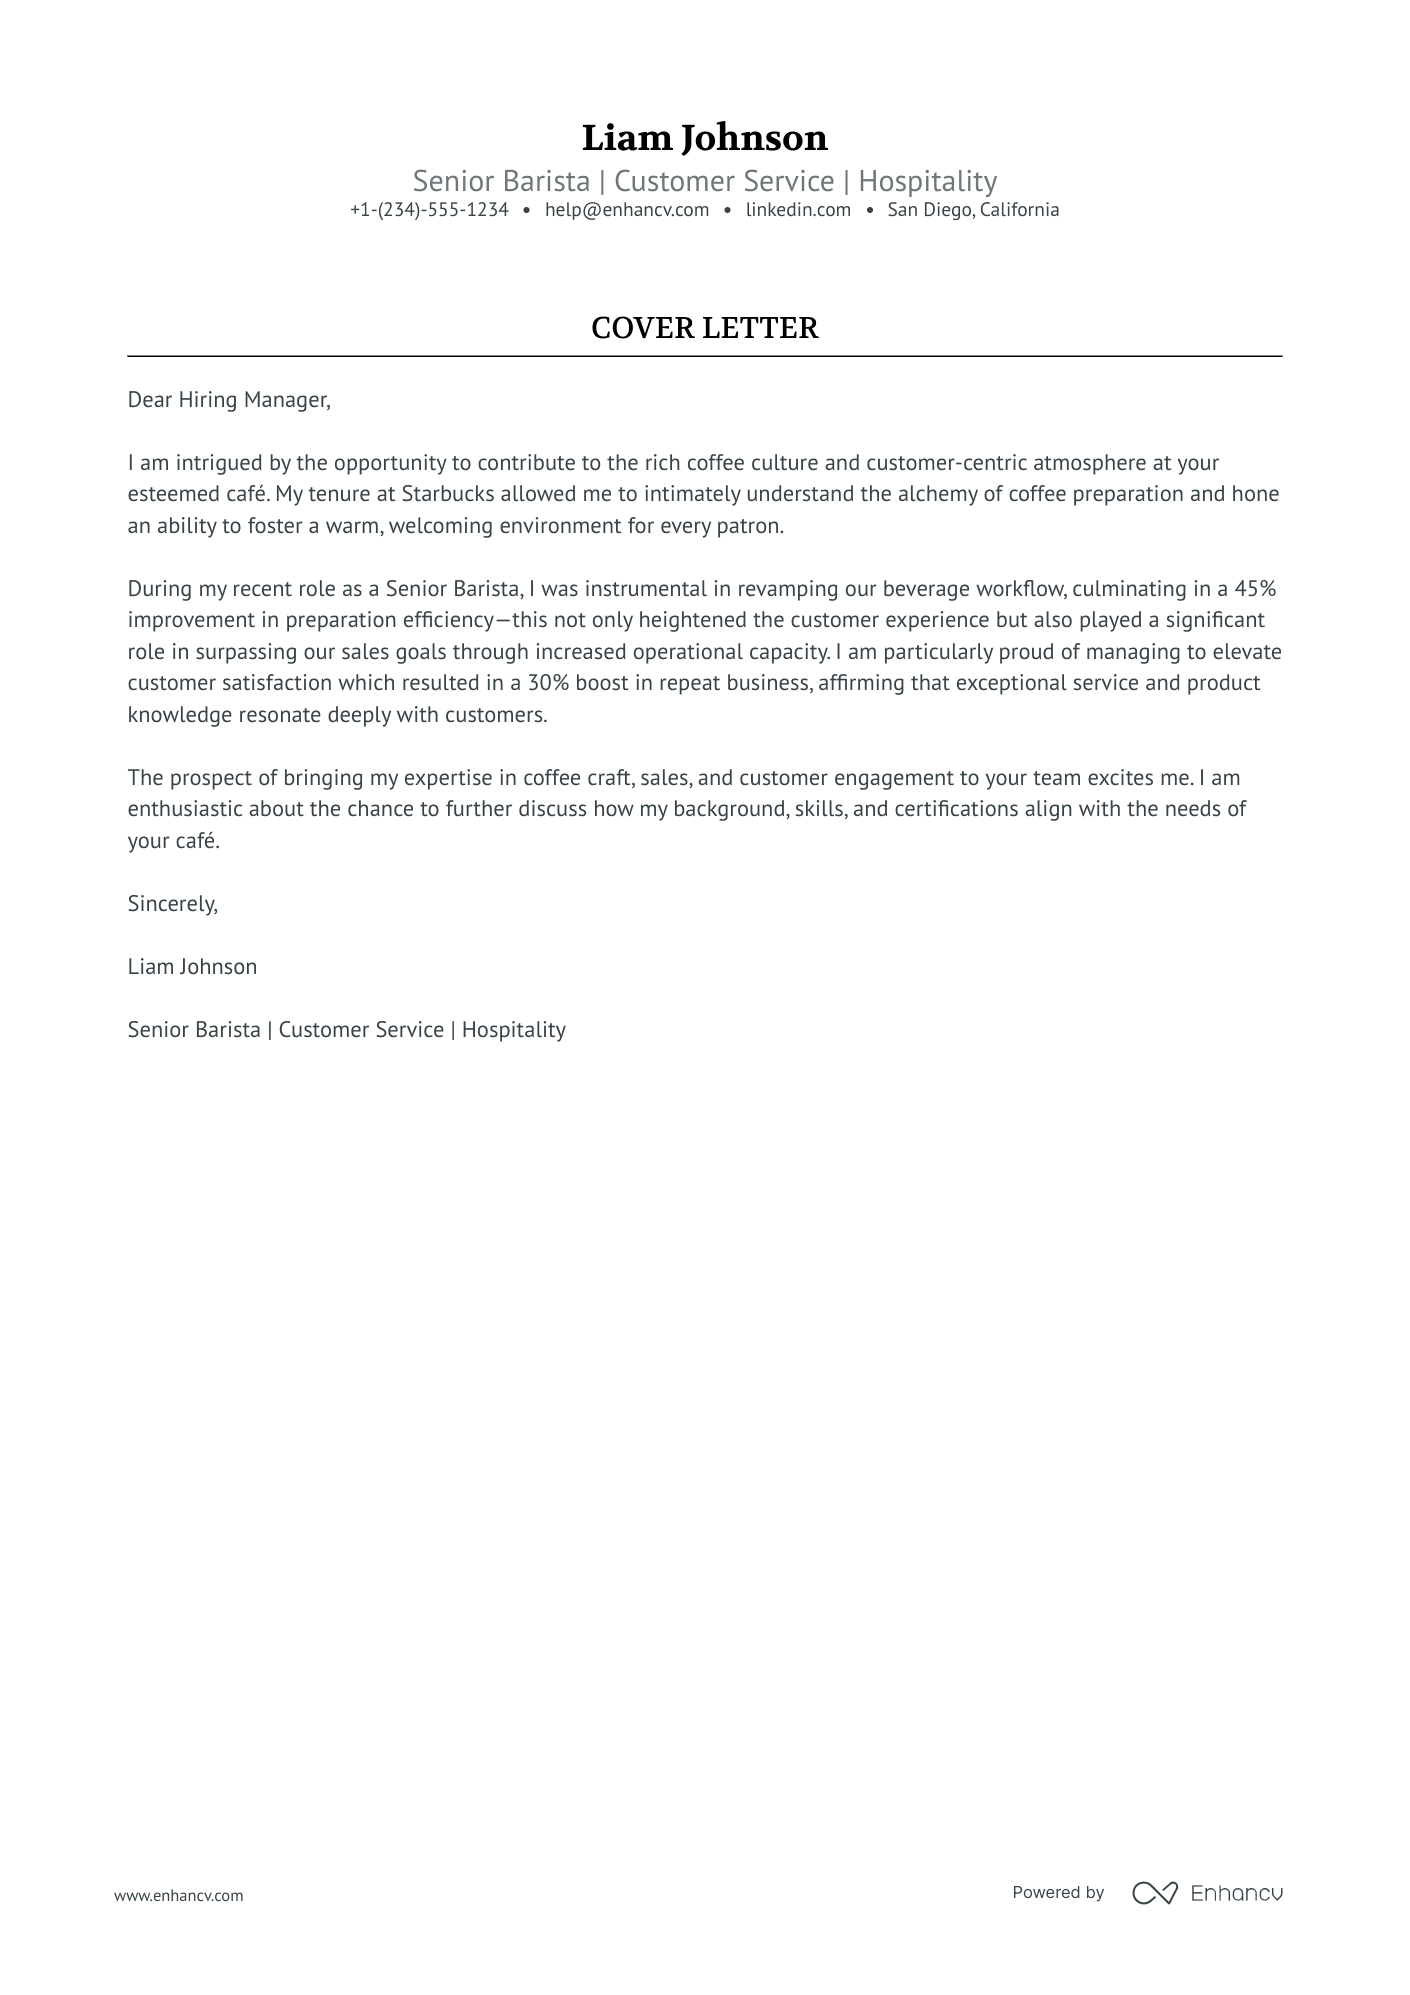 cover letter for barista position no experience